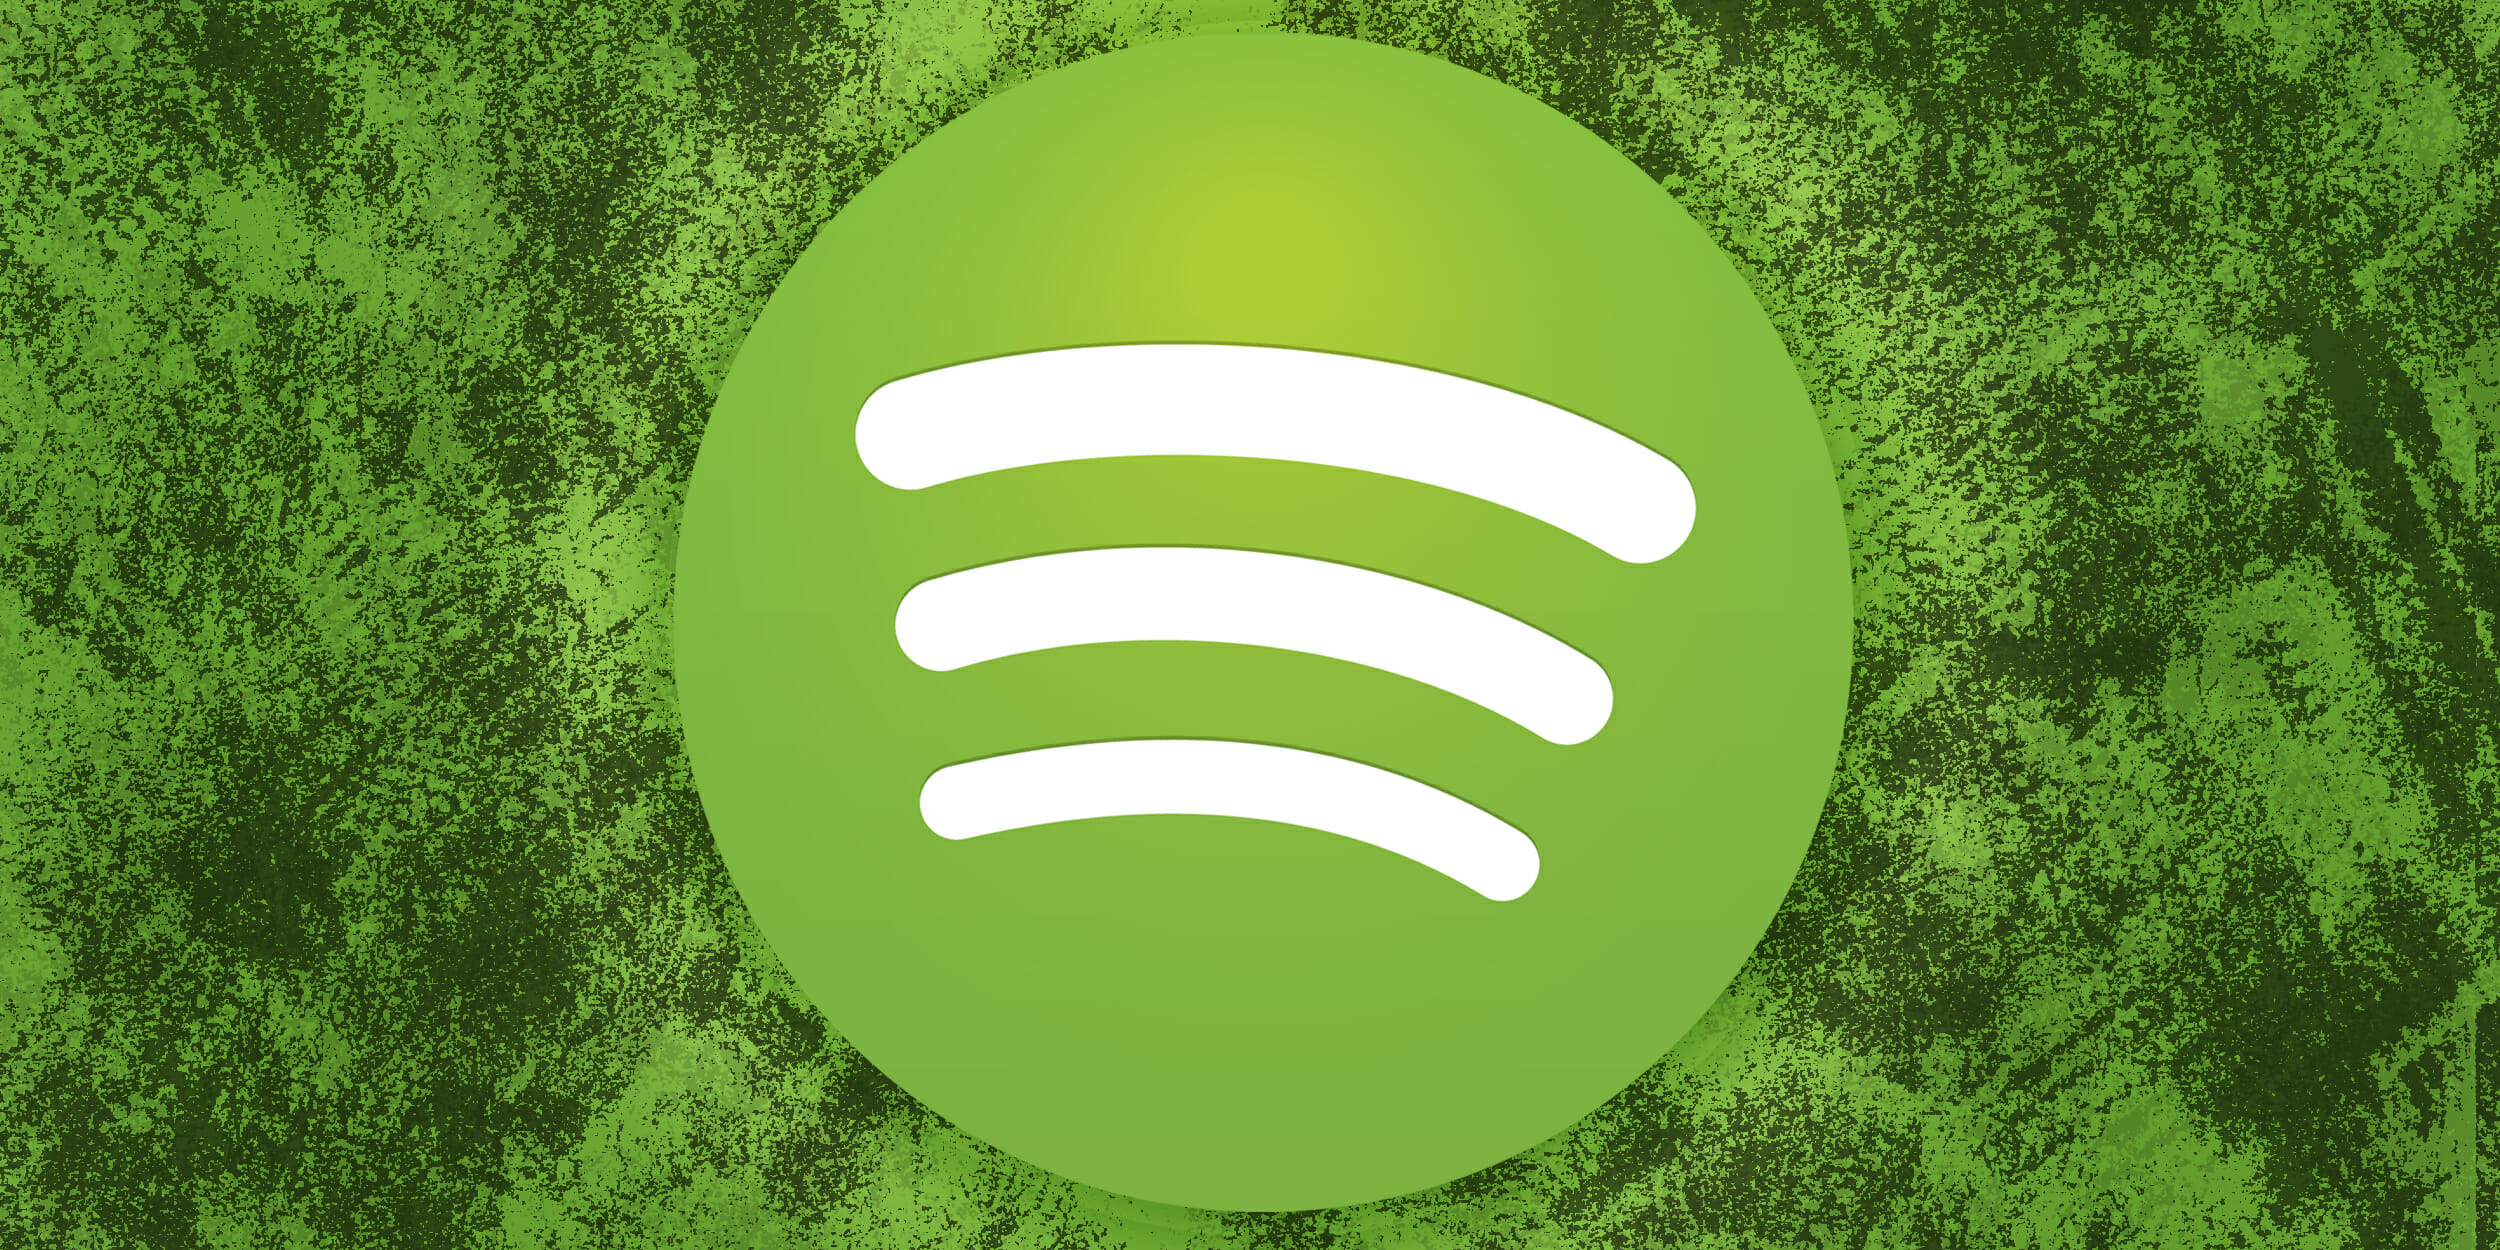 does spotify download music to your phone